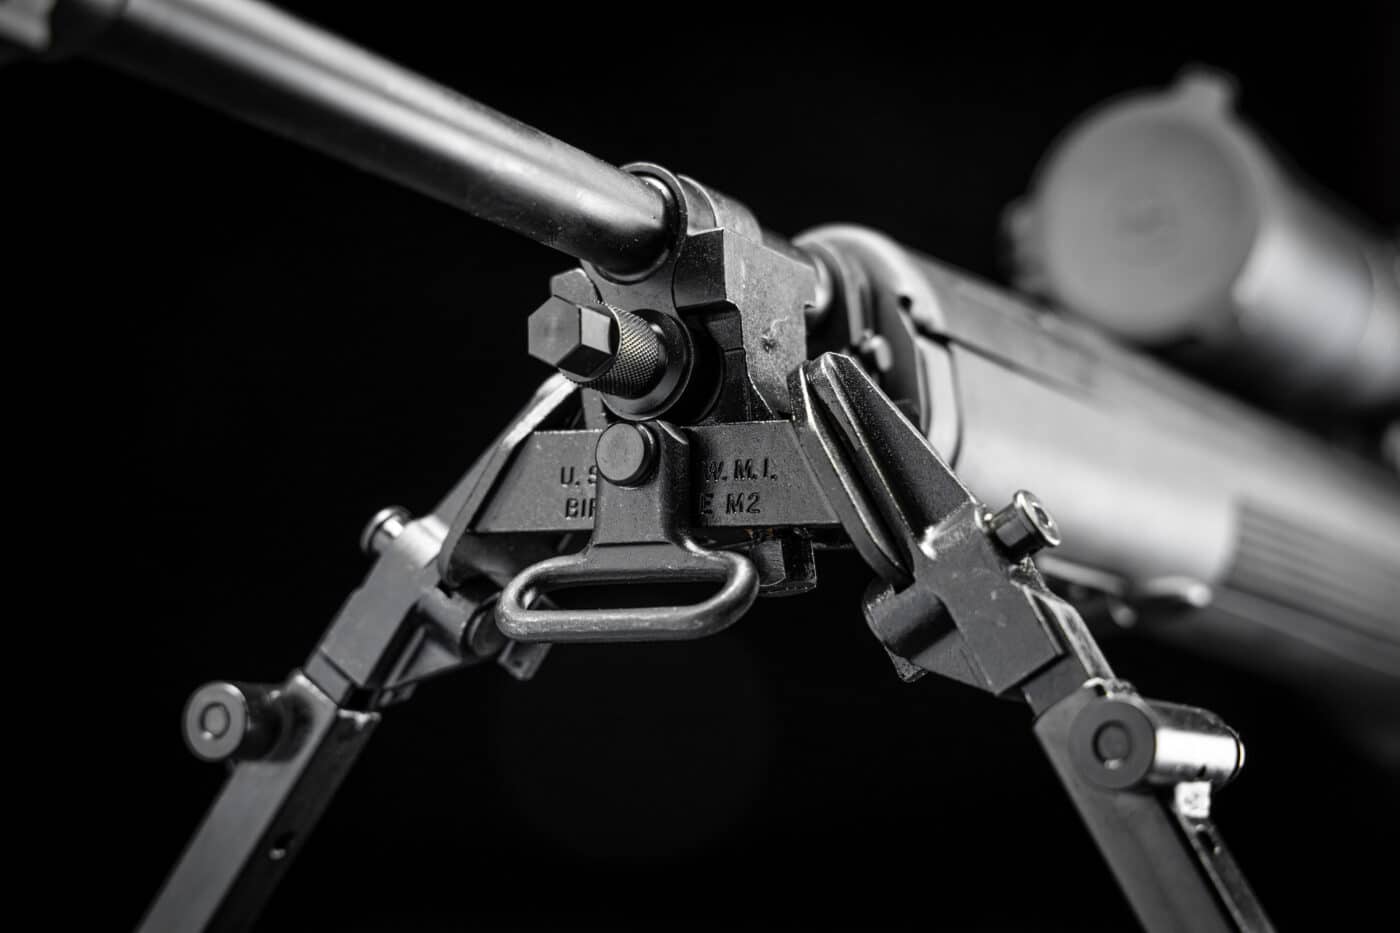 attachment point on m1a for the m2 bipod